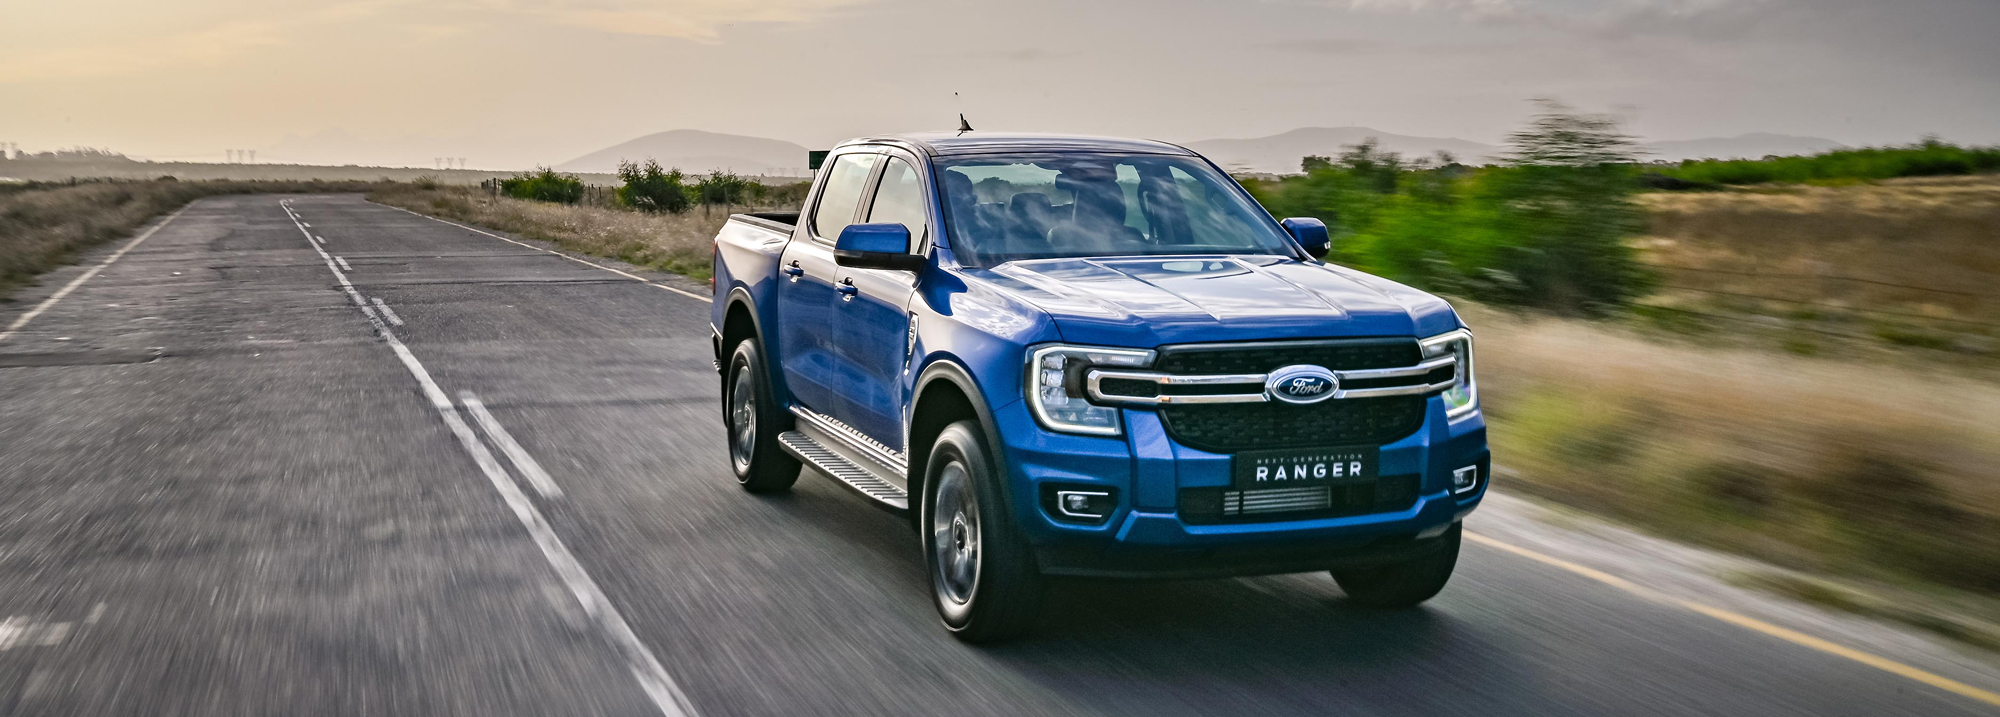 Ford Ranger XLT offers great balance between tech and value for money